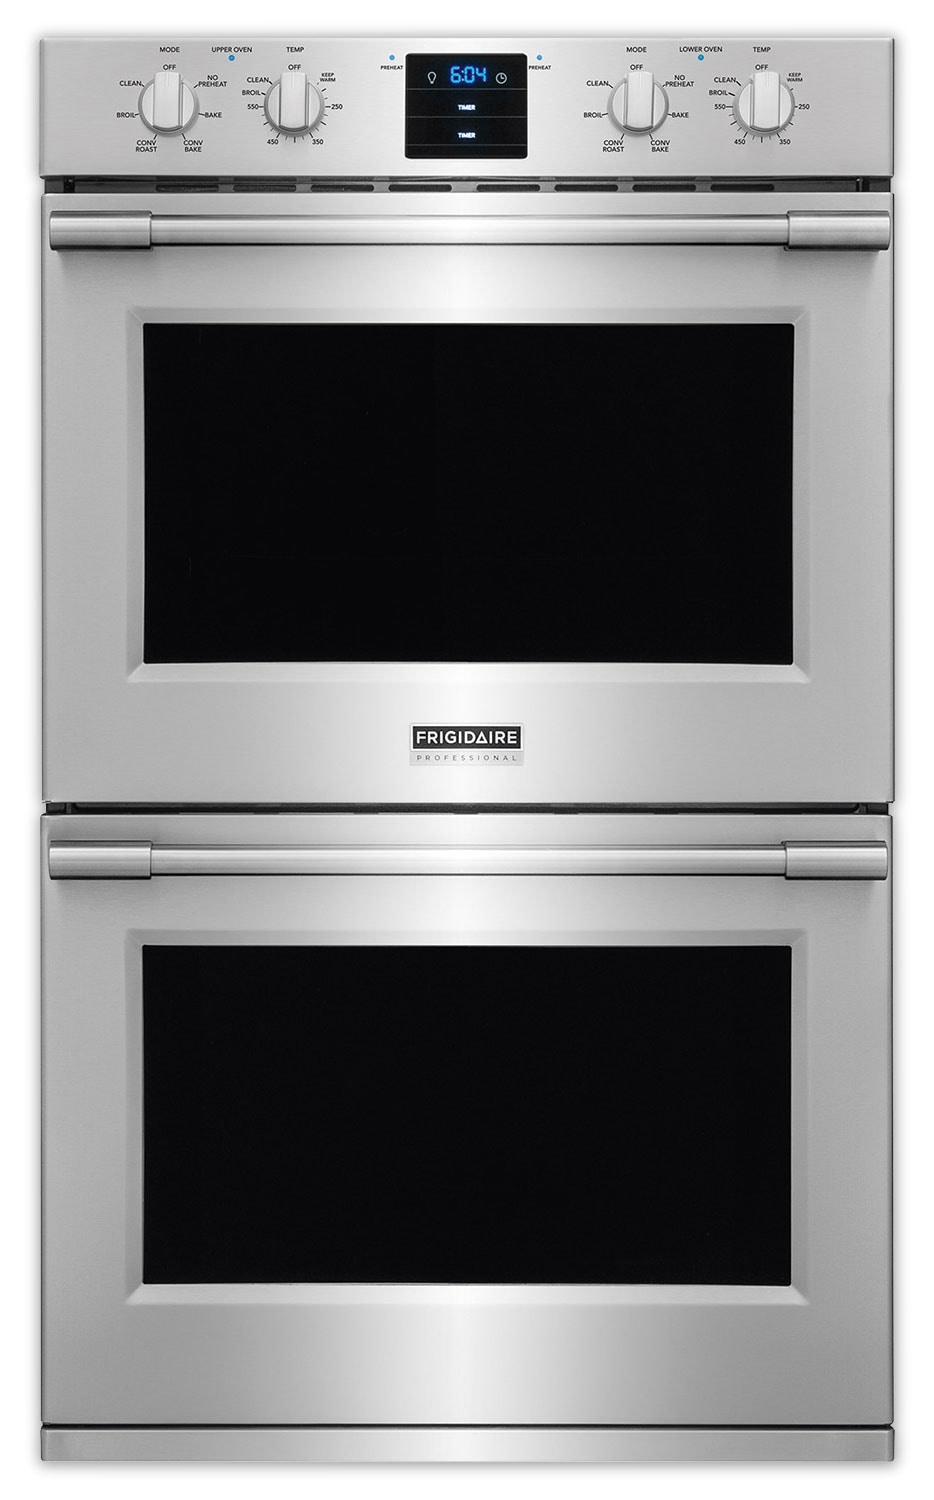 Frigidaire Professional Stainless Steel Convection Double Wall Oven 10. Frigidaire Stainless Steel Wall Oven